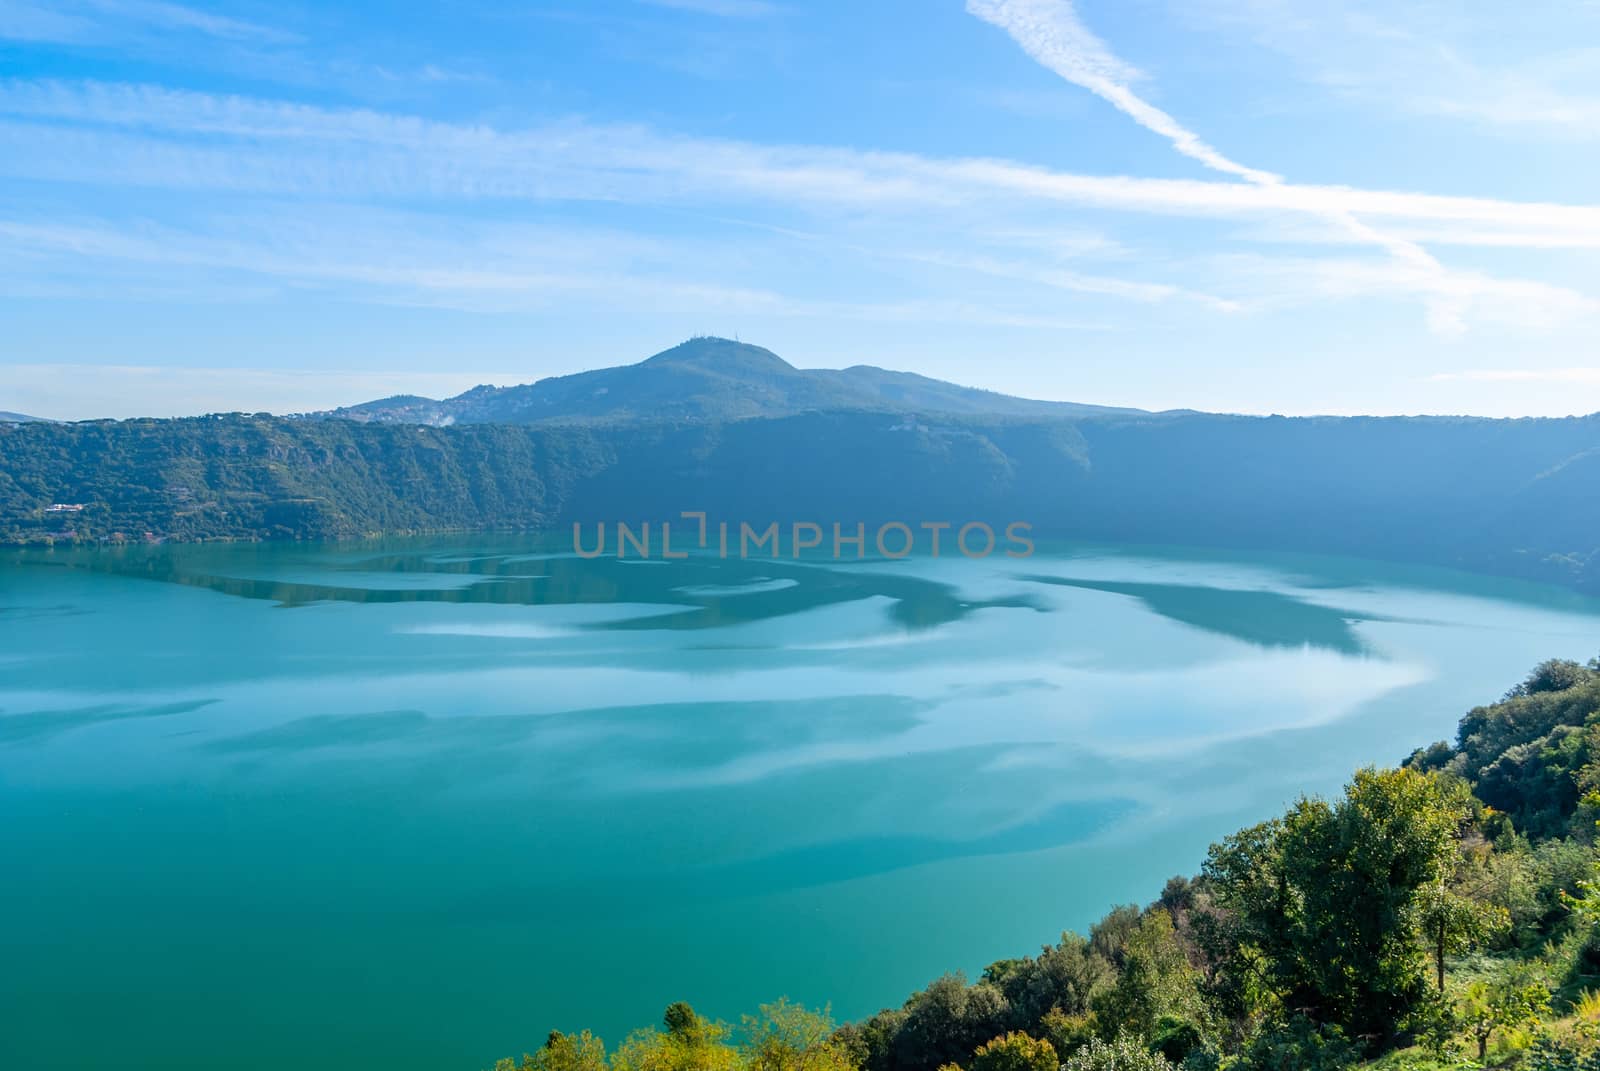 View of Lake Albano from the town of Castel Gandolfo, Italy by Zhukow